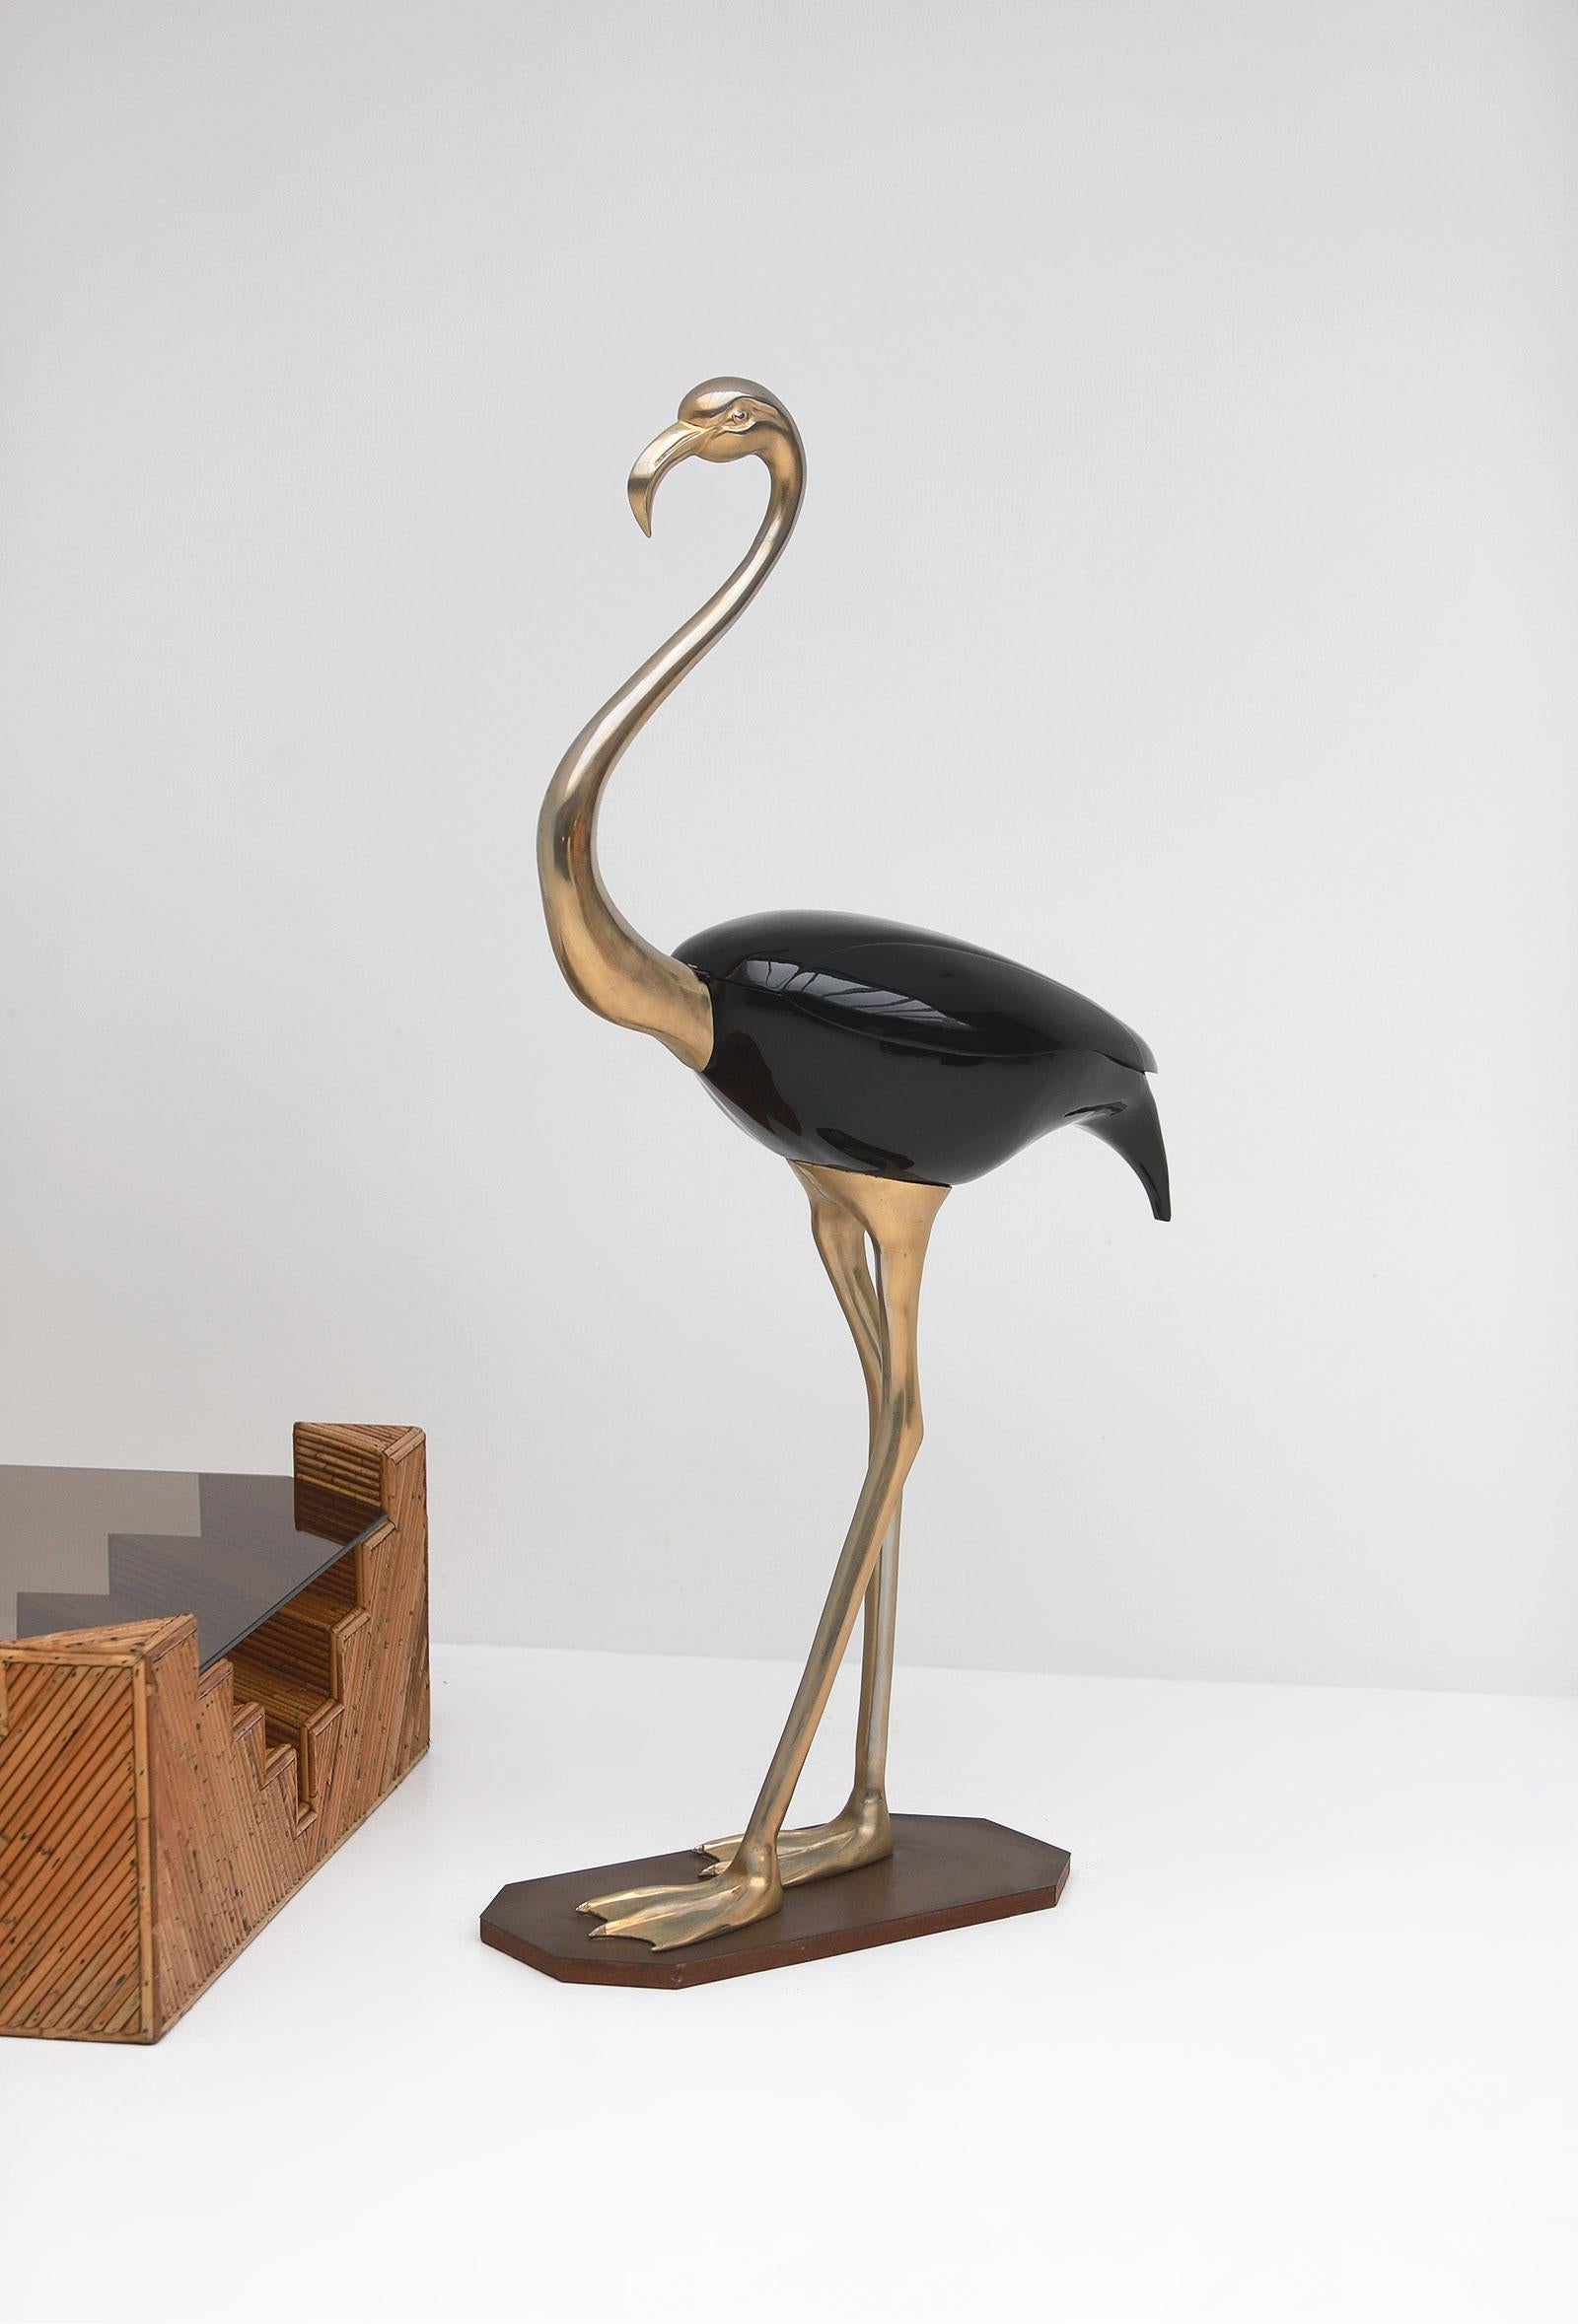 Large flamingo sculpture by Fondica, France 1970. The sculpture is fully made of brass and has a black lacquered storage compartment. When opening the lid, an original metal support helps the compartment under the wings to stay open. Inside the